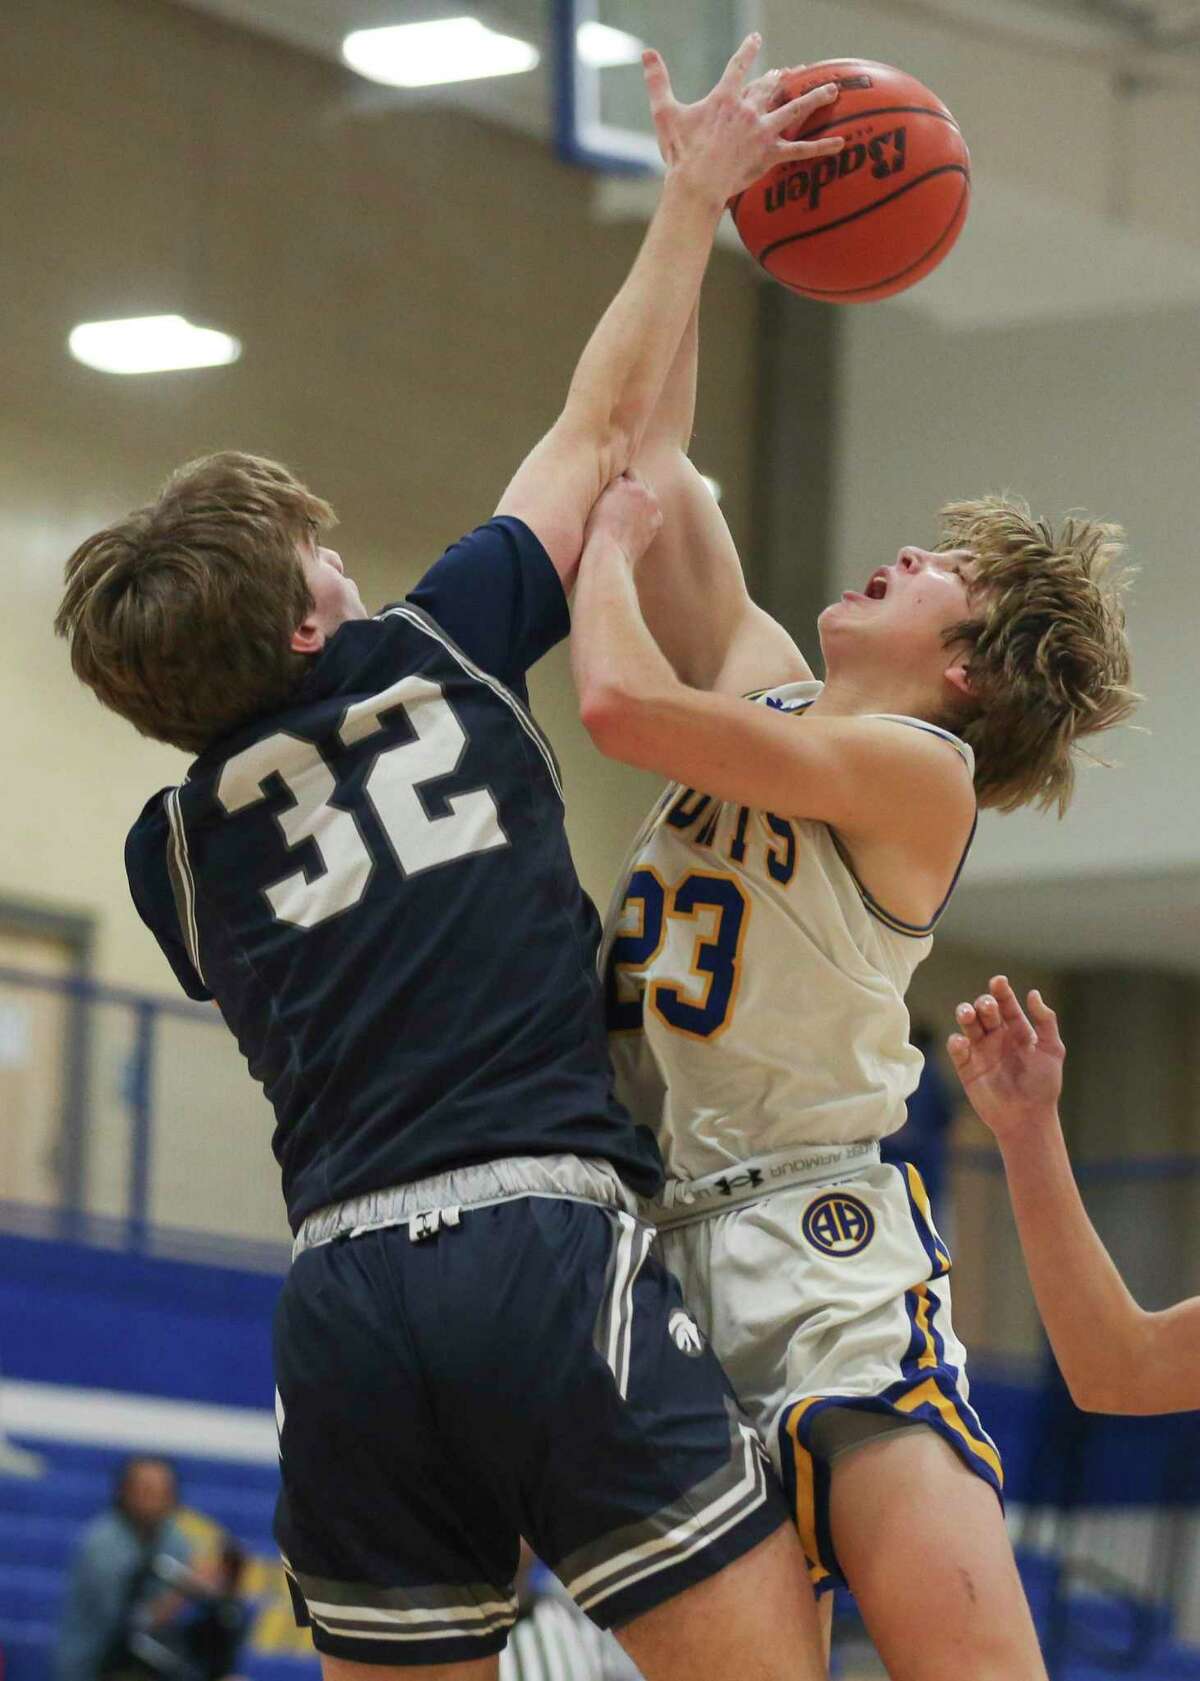 Boerne-Champion’s Owen Tate (32) blocks Alamo Heights’ Beck Tippit (23) from the net during the second quarter at Alamo Heights High School in San Antonio, Texas, Tuesday, Dec. 14, 2021. The Chargers defeated the Mules 62-42.